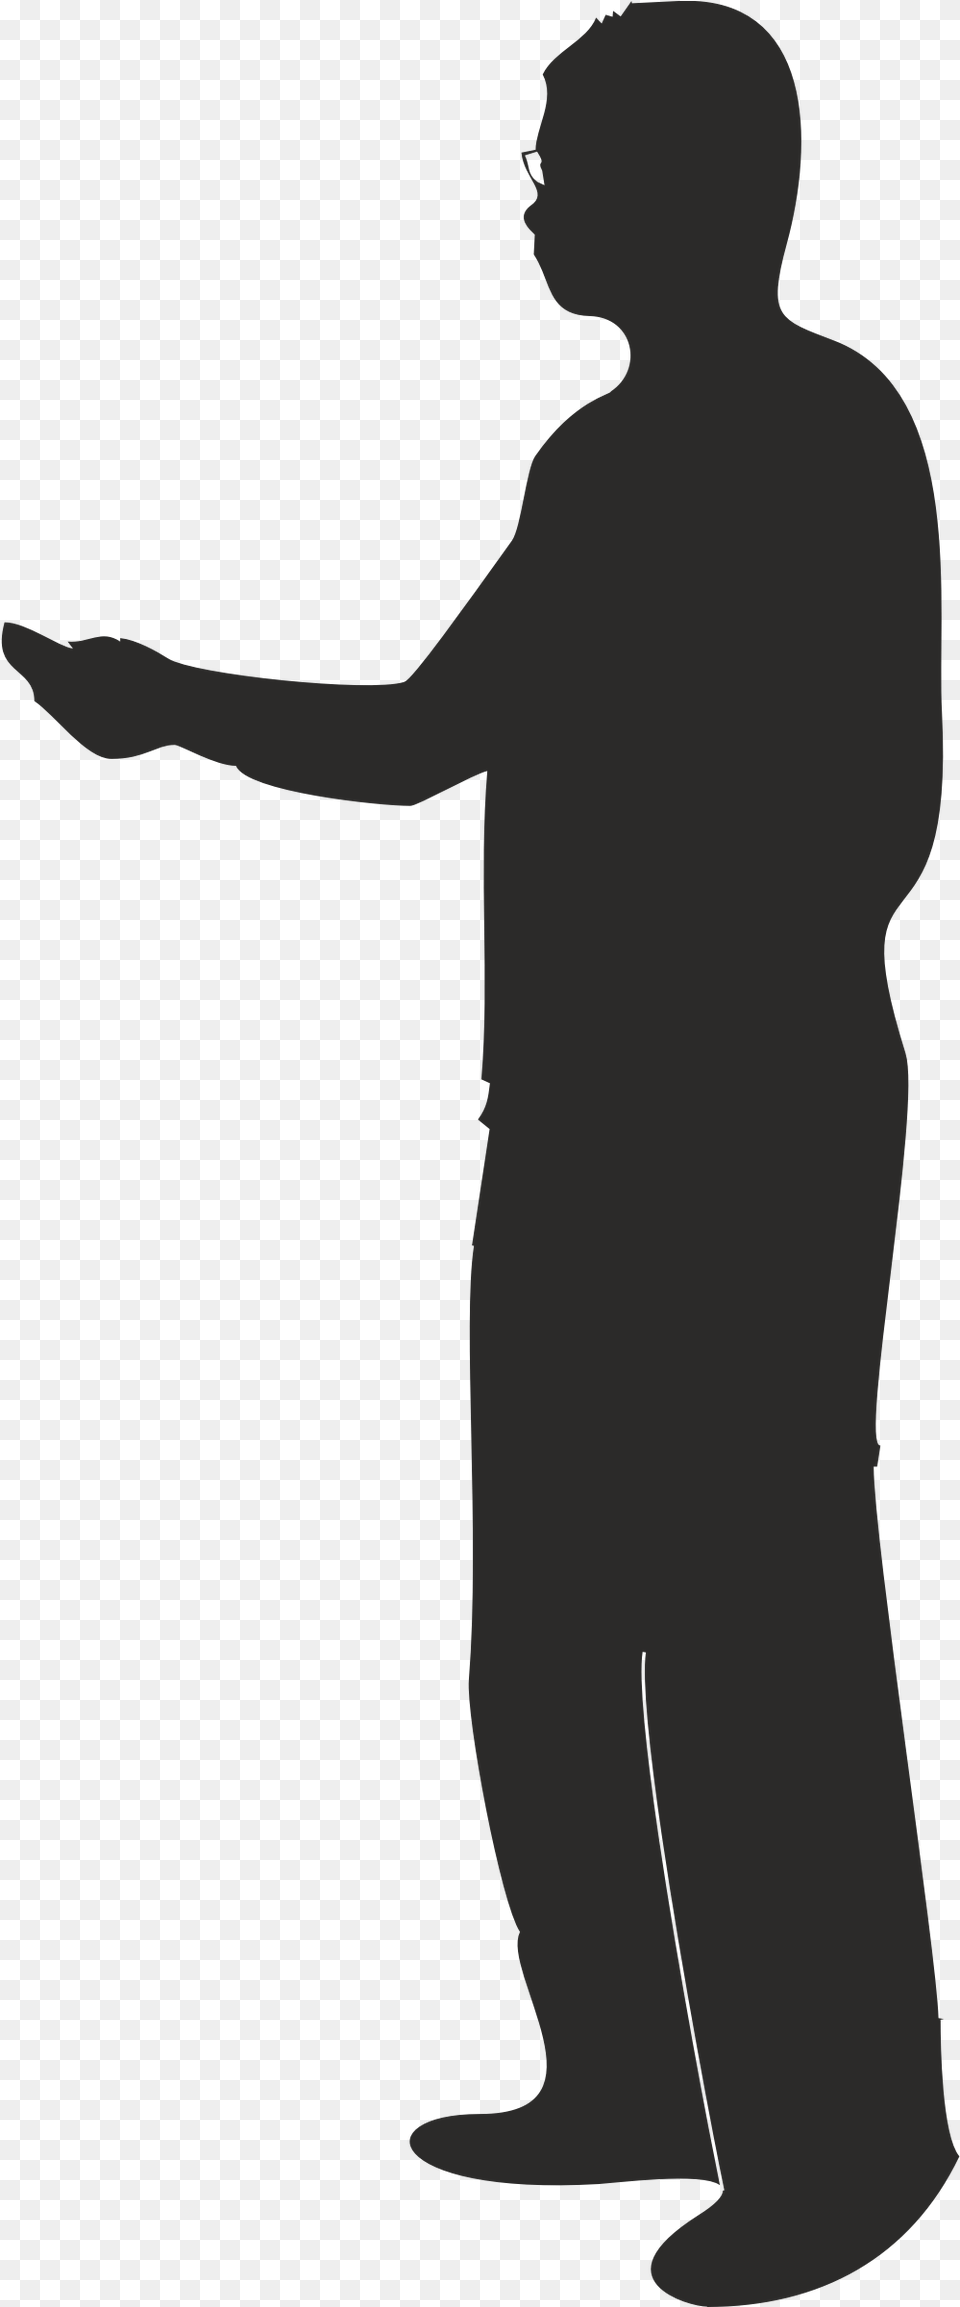 Hd Clipart Silhouette Person Pointing Vector Man Silhouette Outline Png